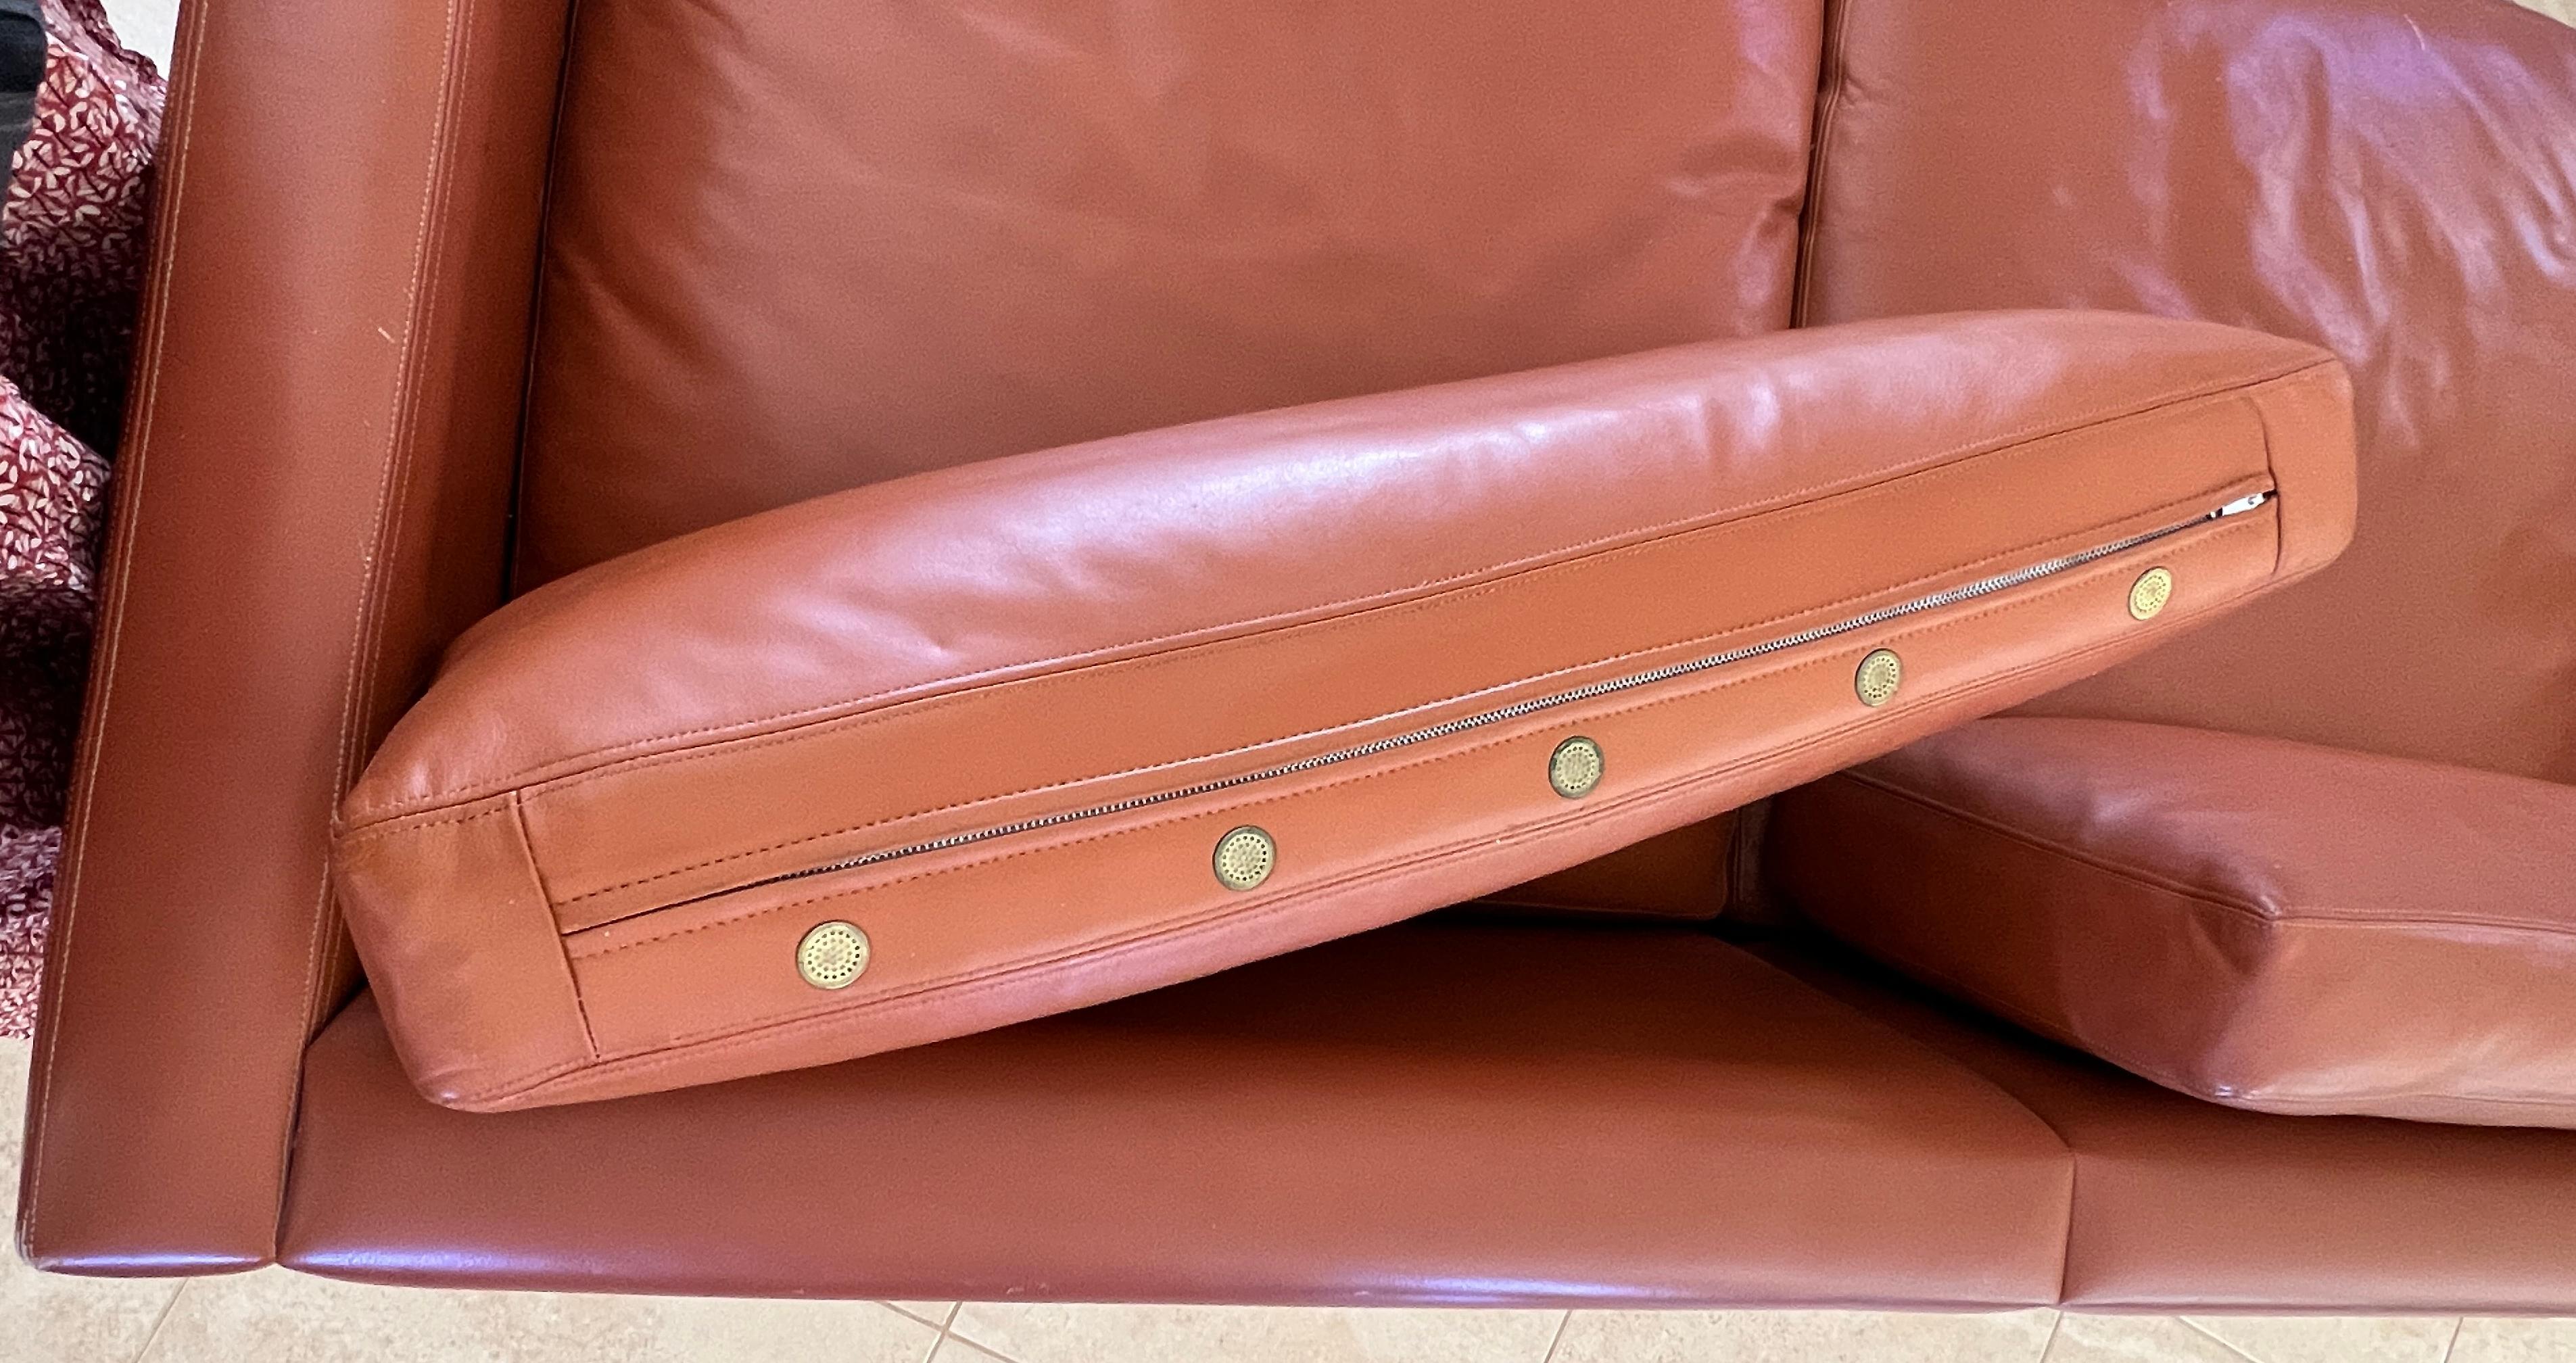 Knoll Sofa by Charles Pfister 1971 Original Sabrina Leather, #2 '2 Available' For Sale 5